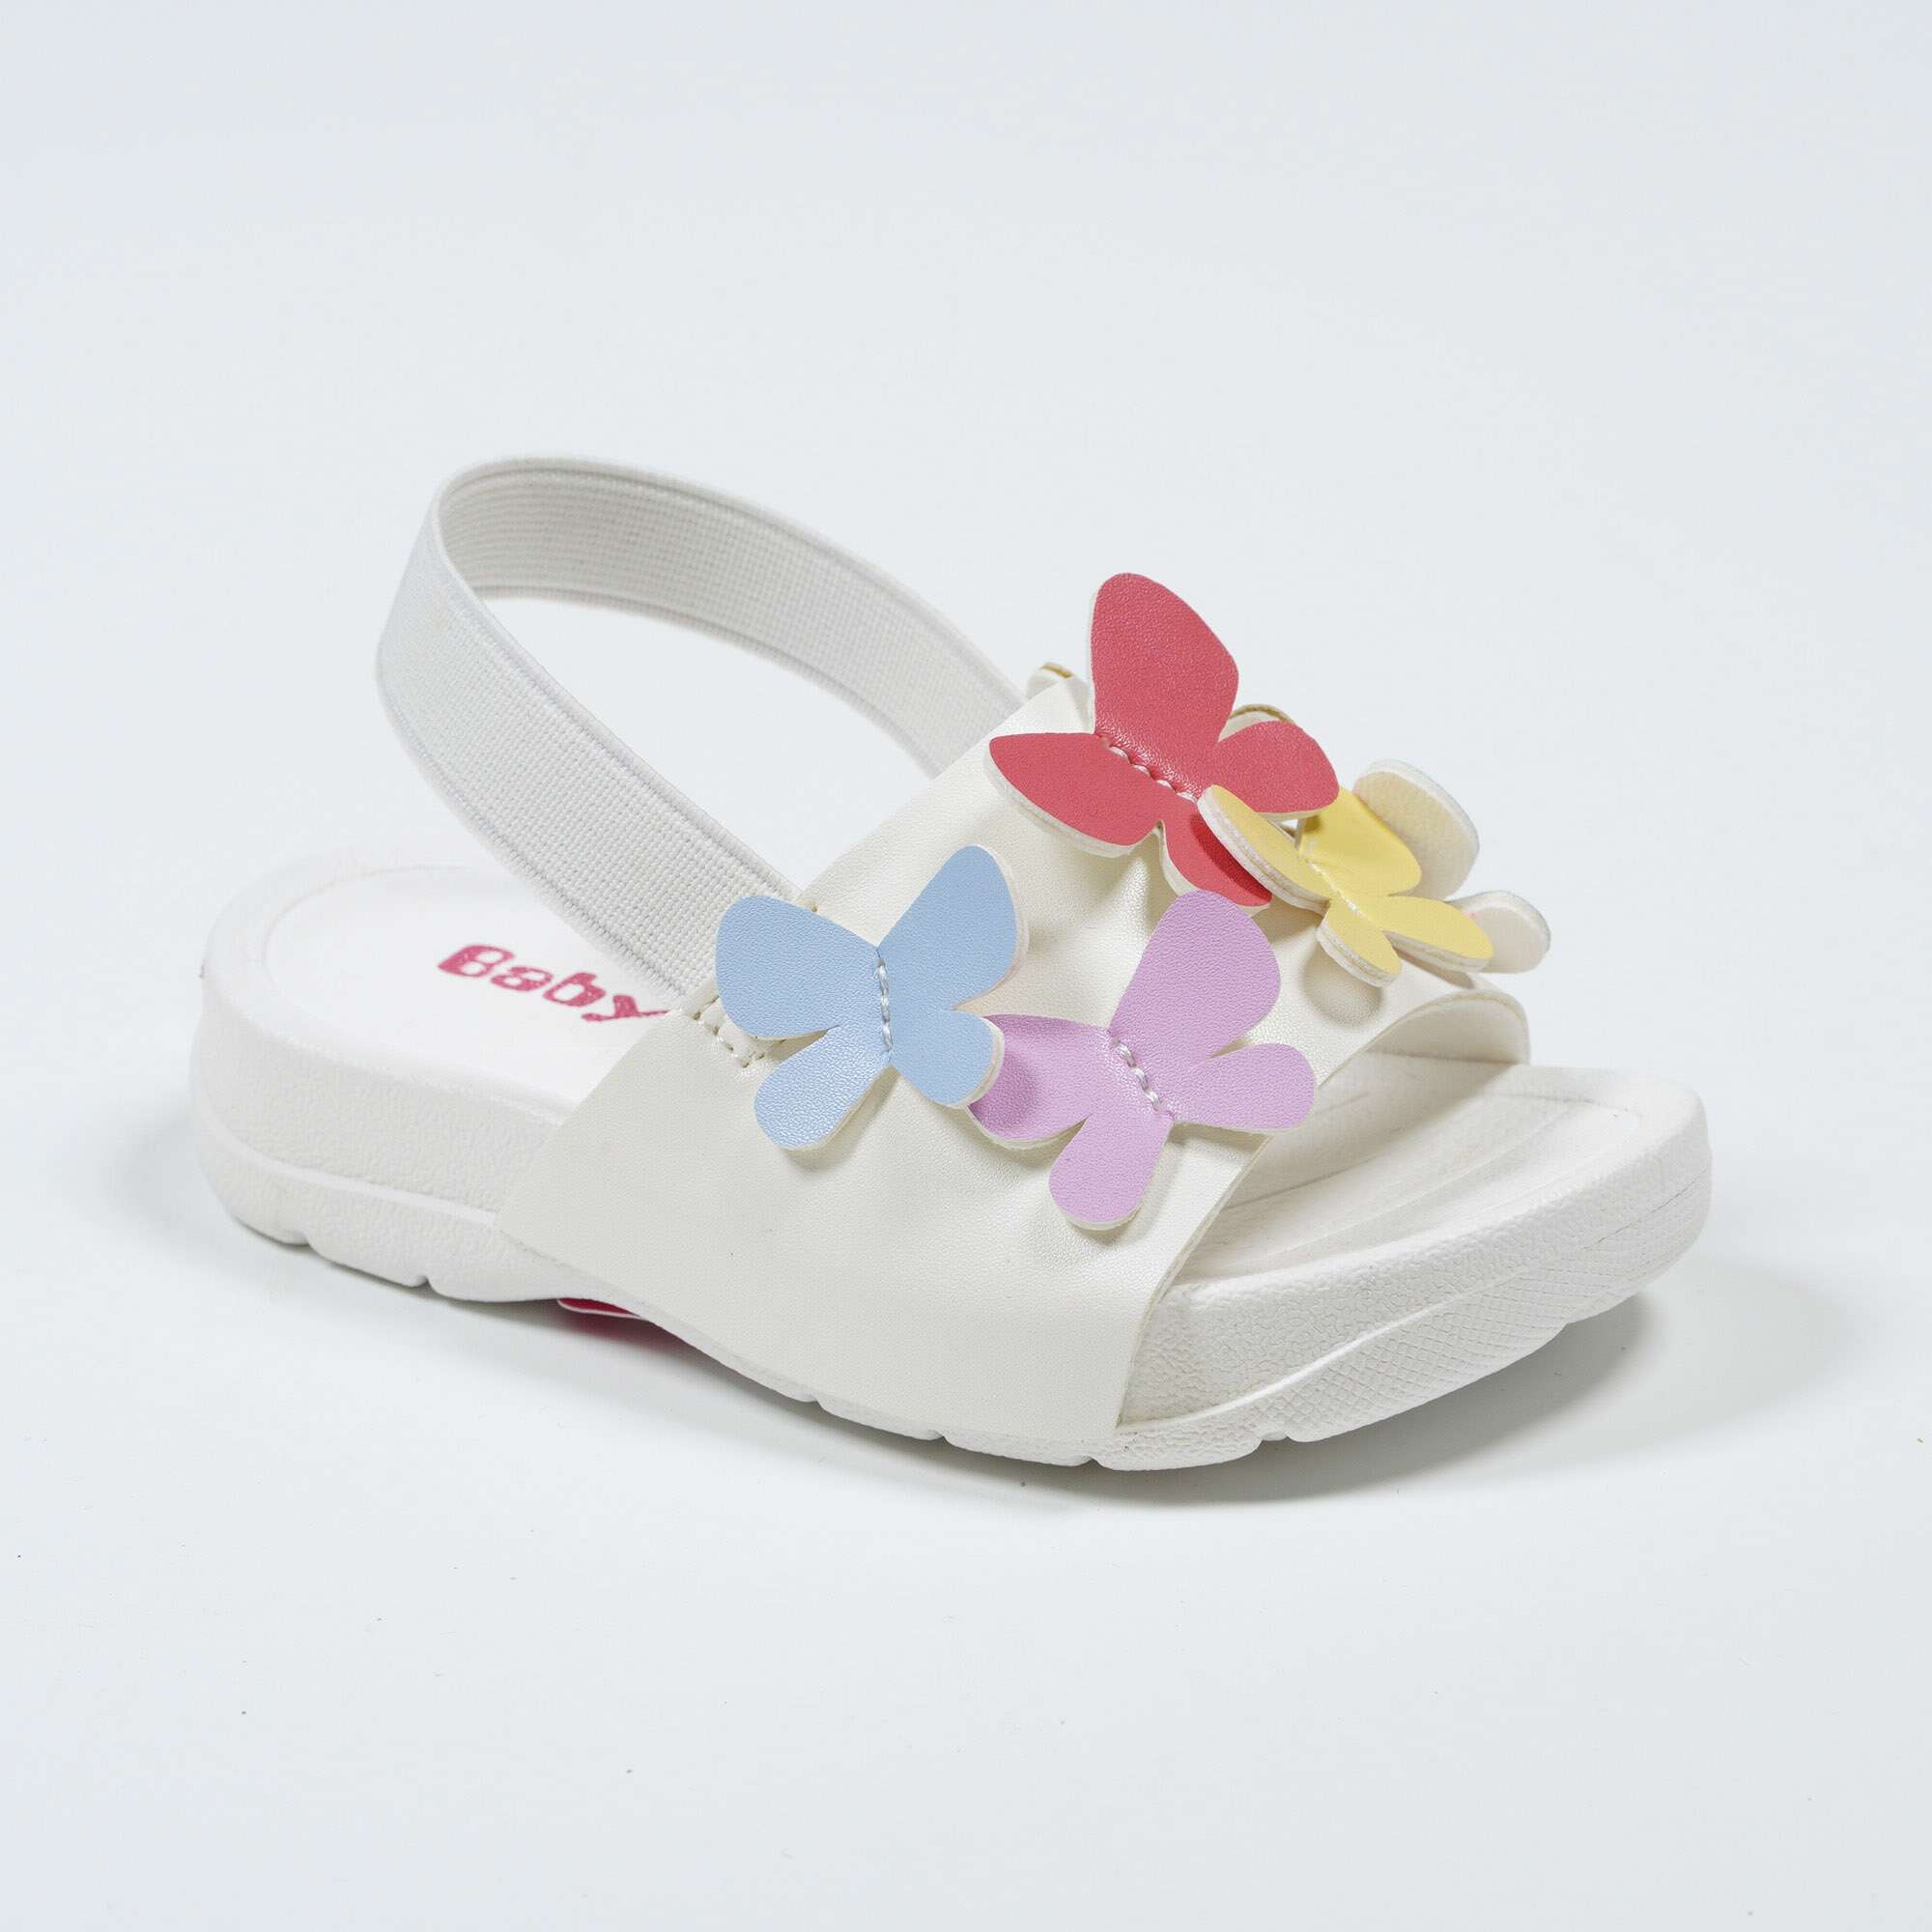 Nikoofly-Colorful-Butterfly-Baby-Slipper-Sandals-YDX2311F-3-white